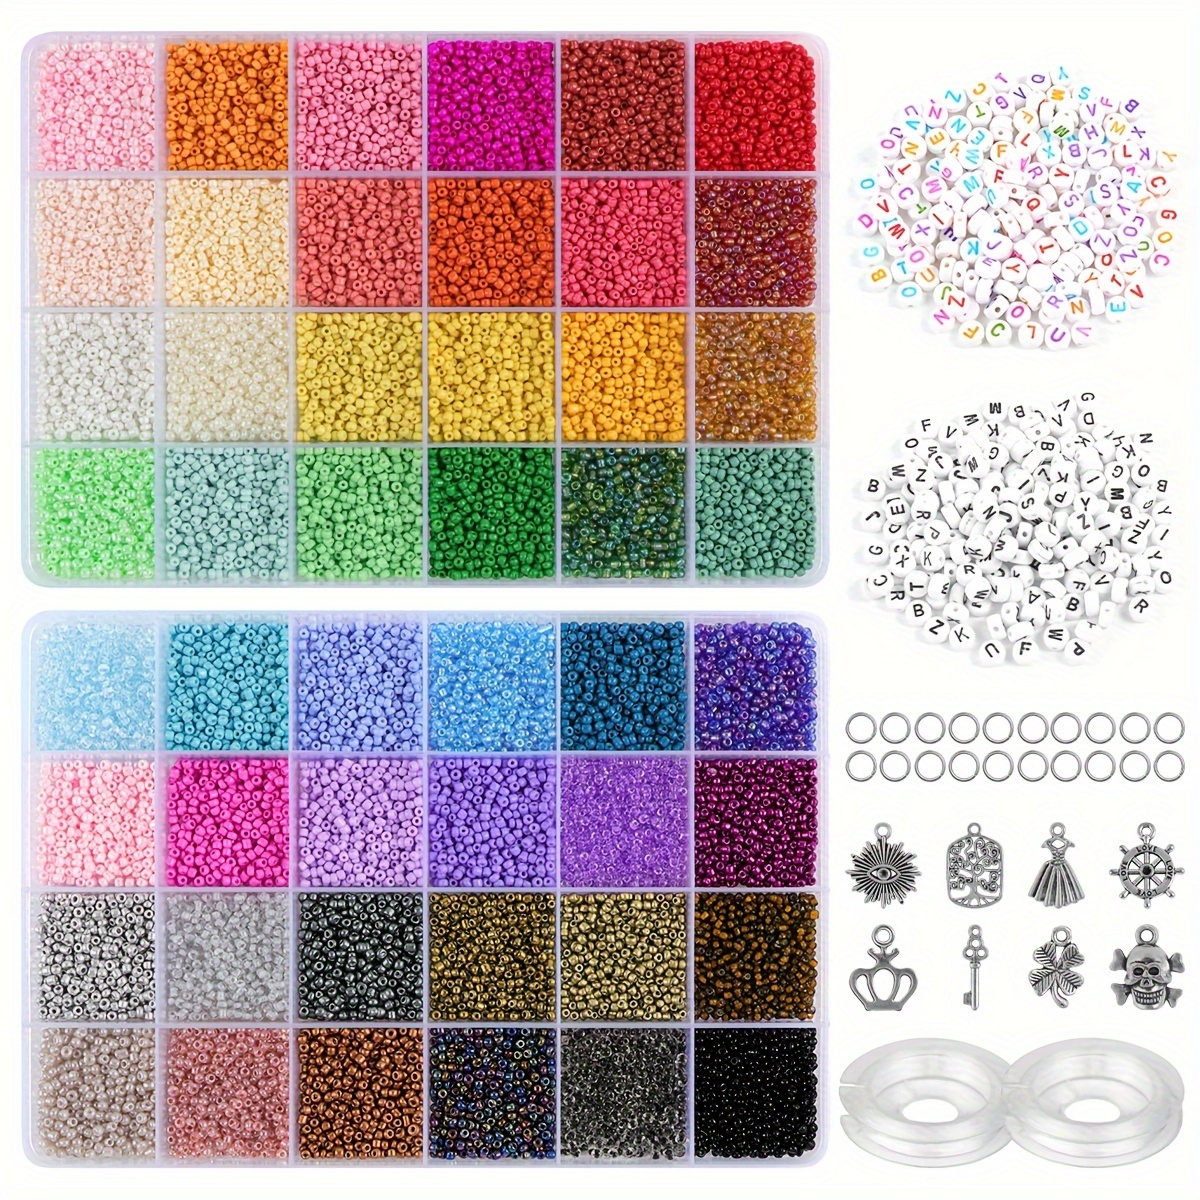 Beads for Threading, 12200 Pieces Seed Beads Bracelets Beads Set 3 mm  Chains DIY Glass Bead Set, Colourful DIY Bracelet Necklaces Jewellery  Beads